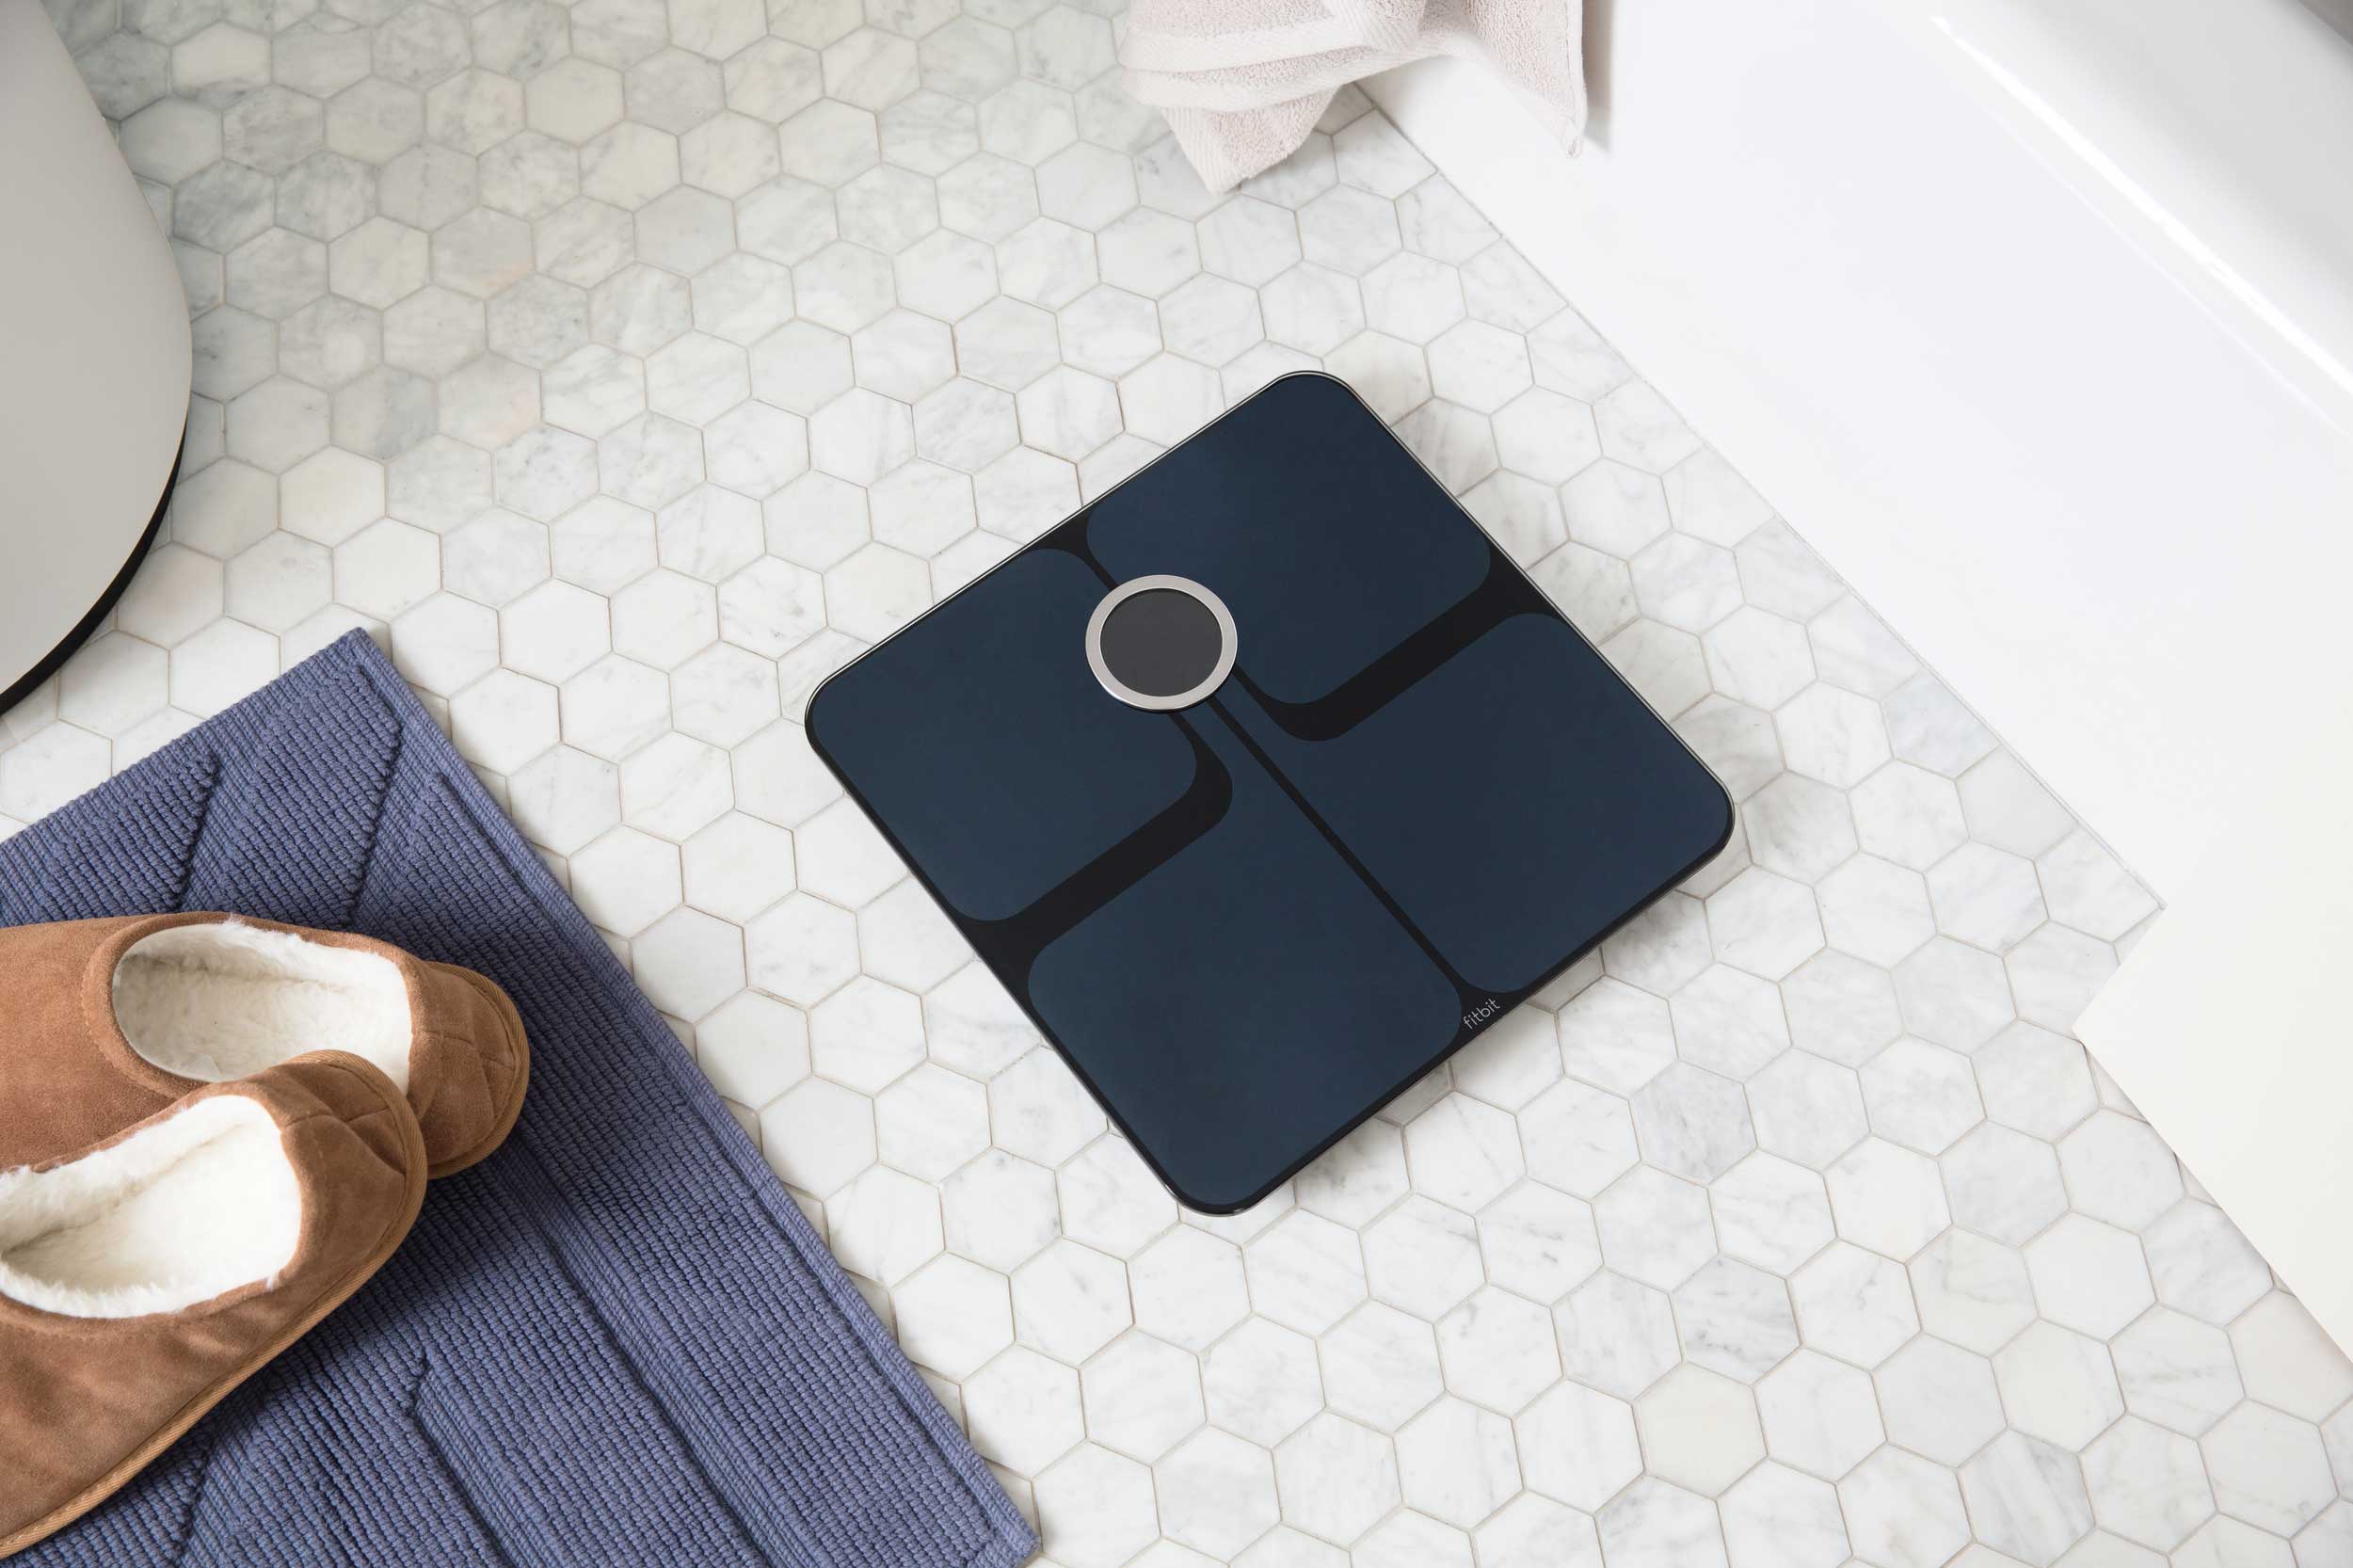 Lifestyle photo of a dark coloured fitbit smart scale on the bathroom floor